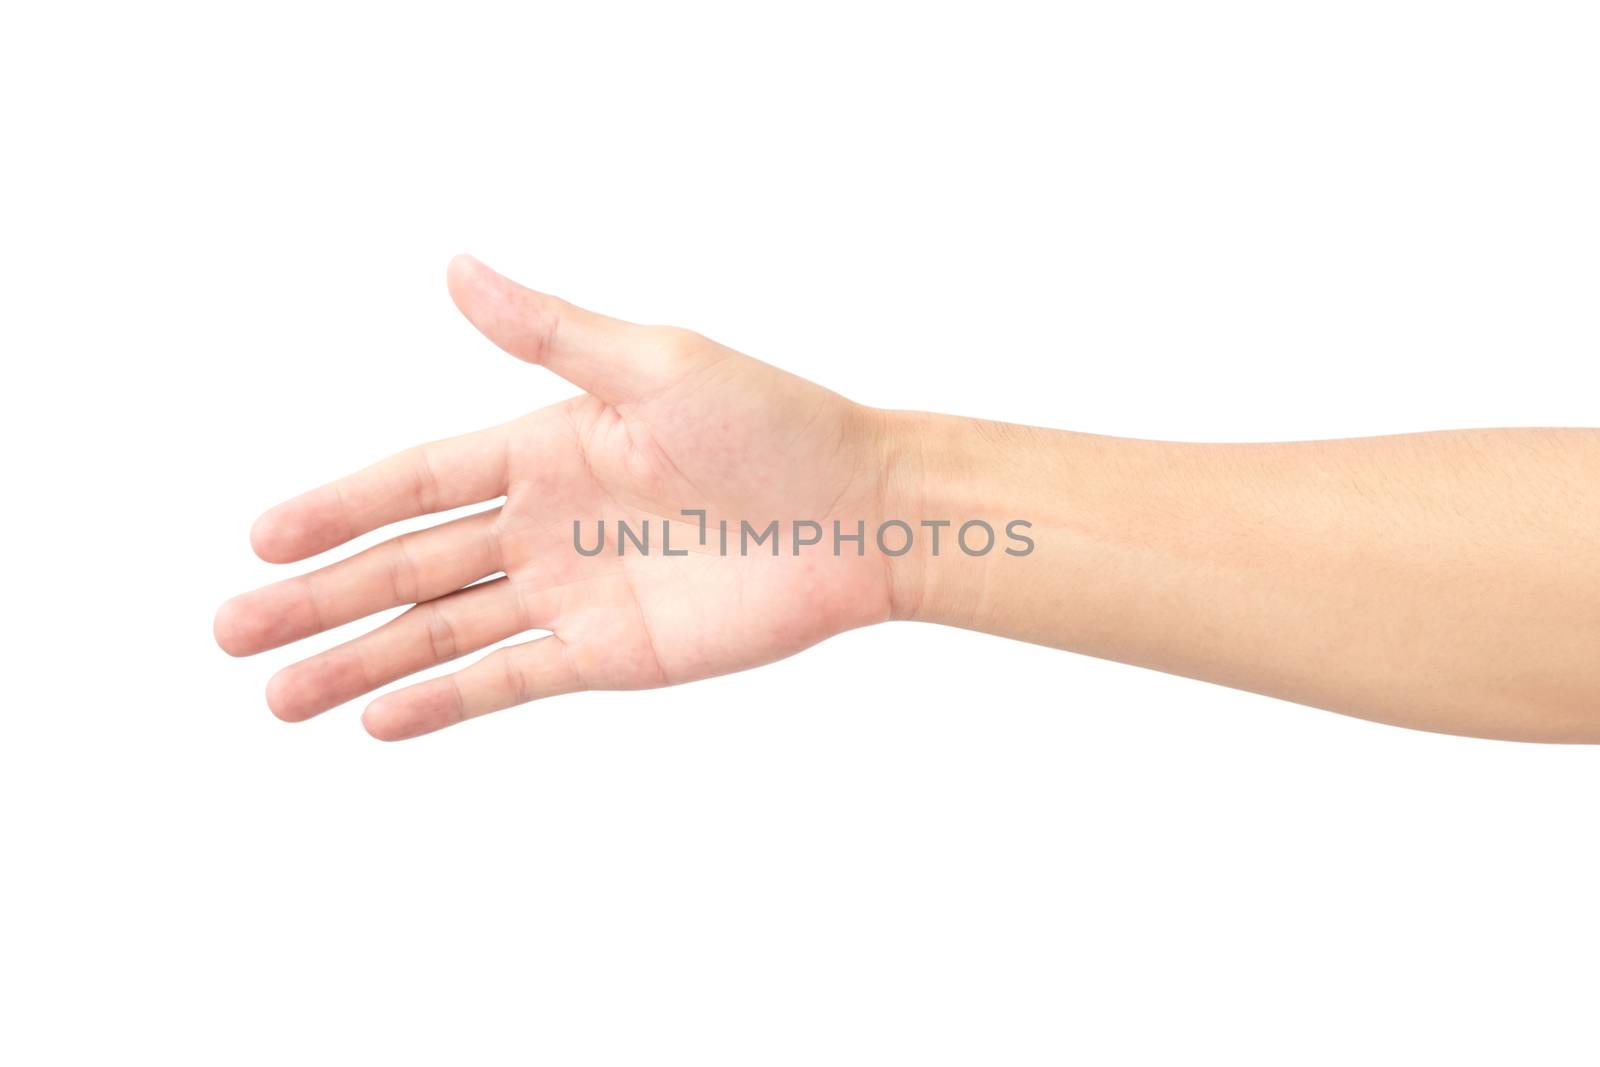 Man arm on white background, health care and medical concept by pt.pongsak@gmail.com